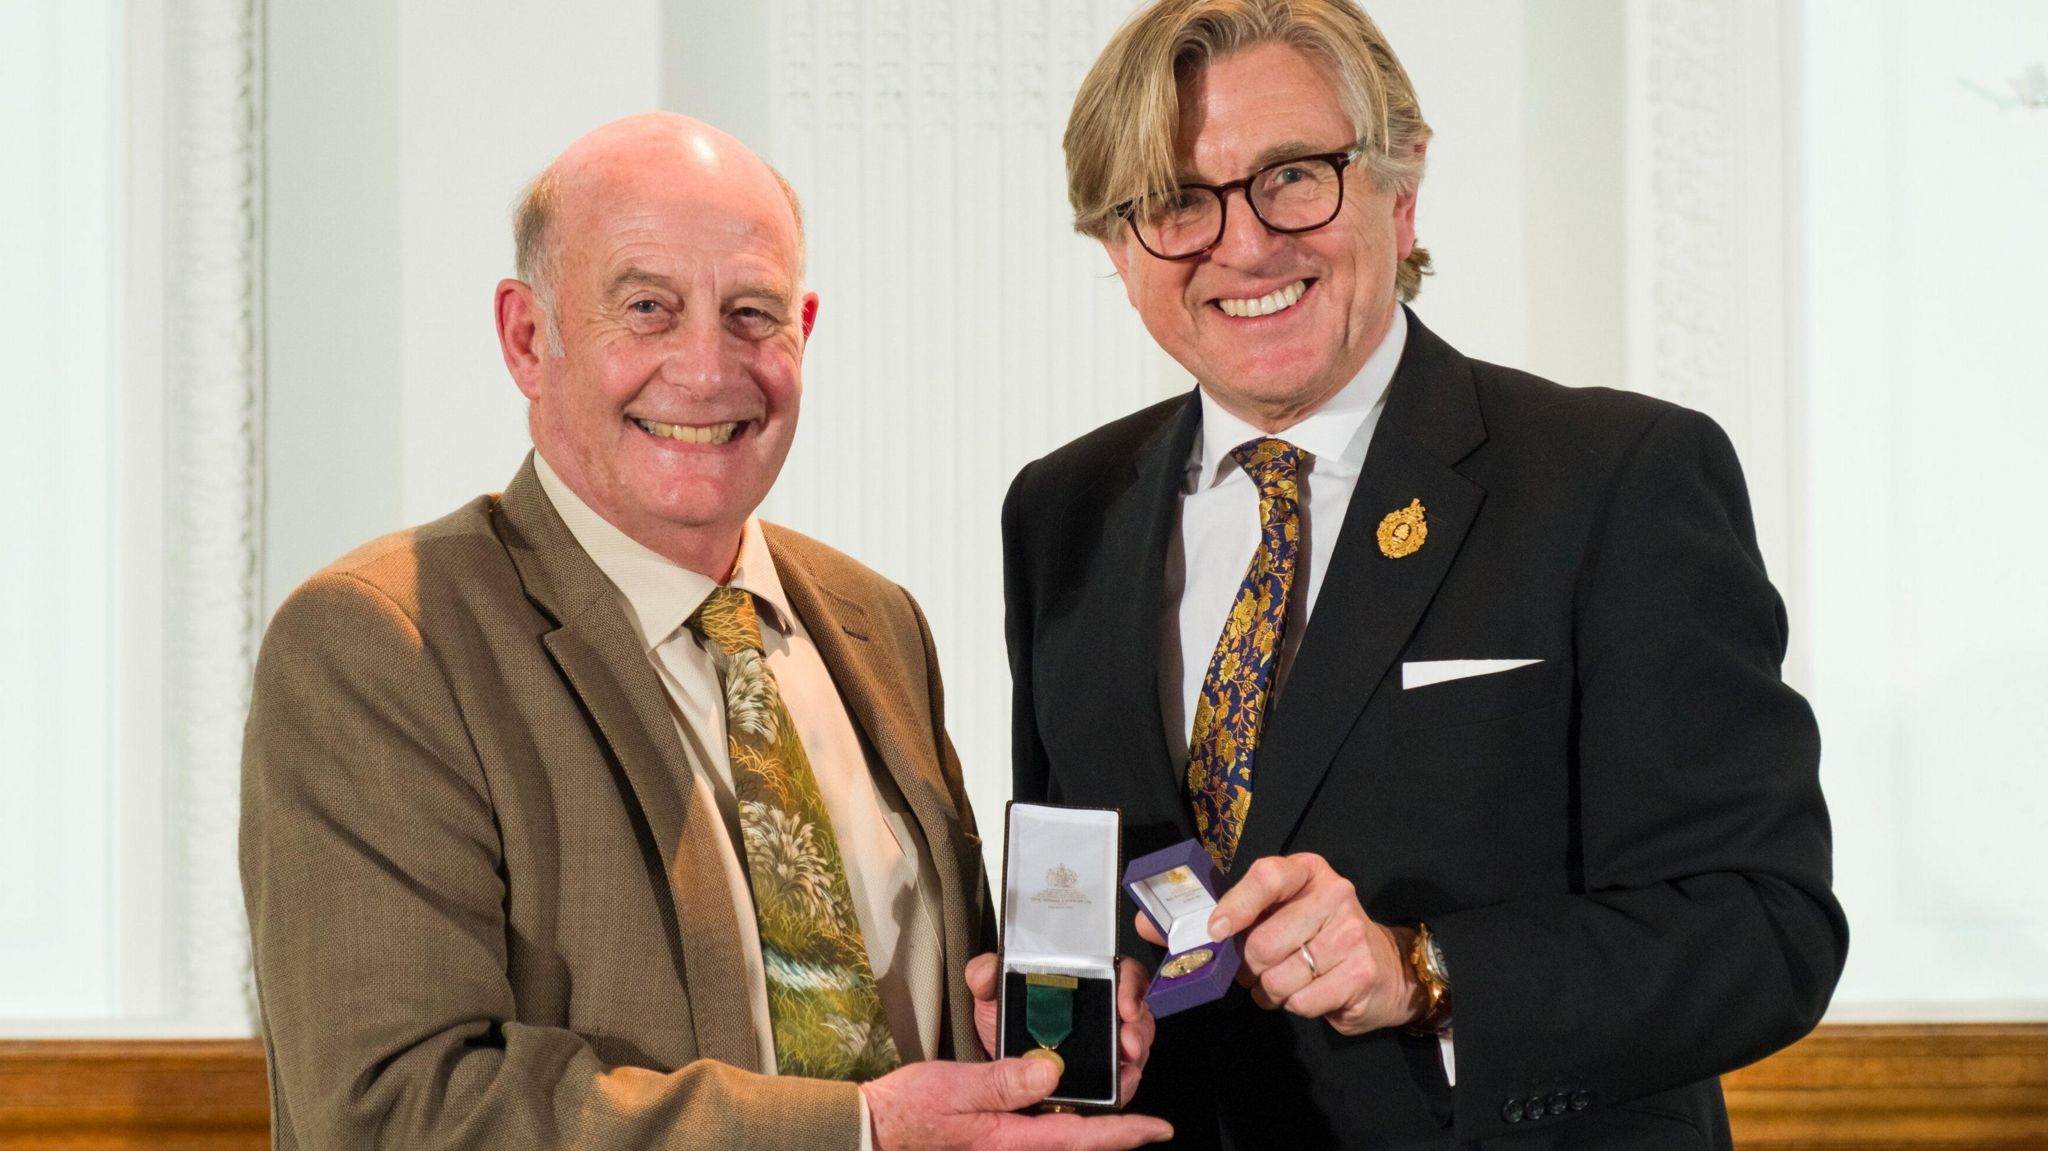 Neil Lucas (left) and Keith Weed holding the medal and smiling at the camera